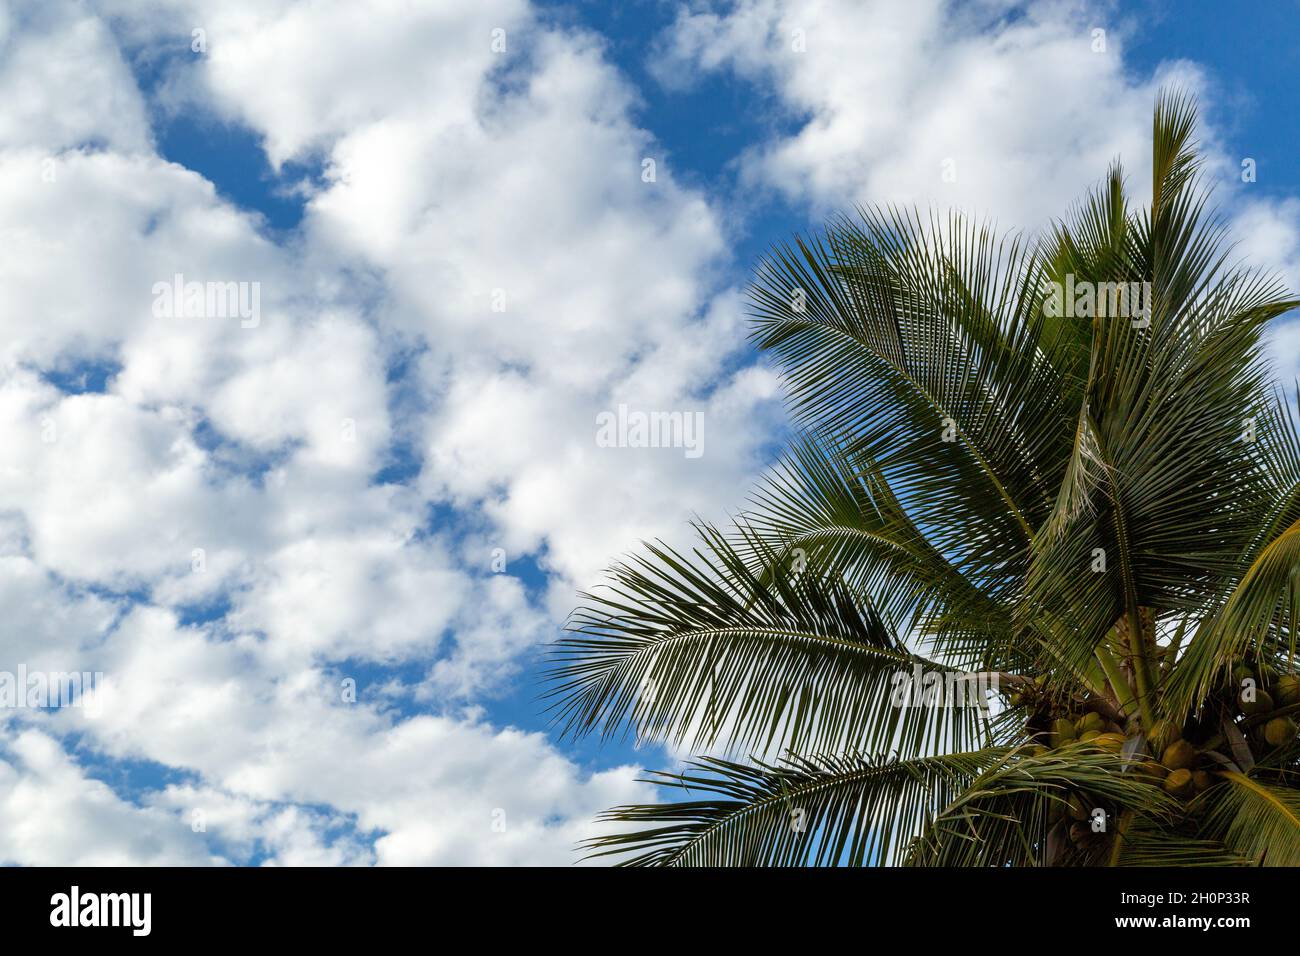 Looking up at a coconut palm tree. Stock Photo